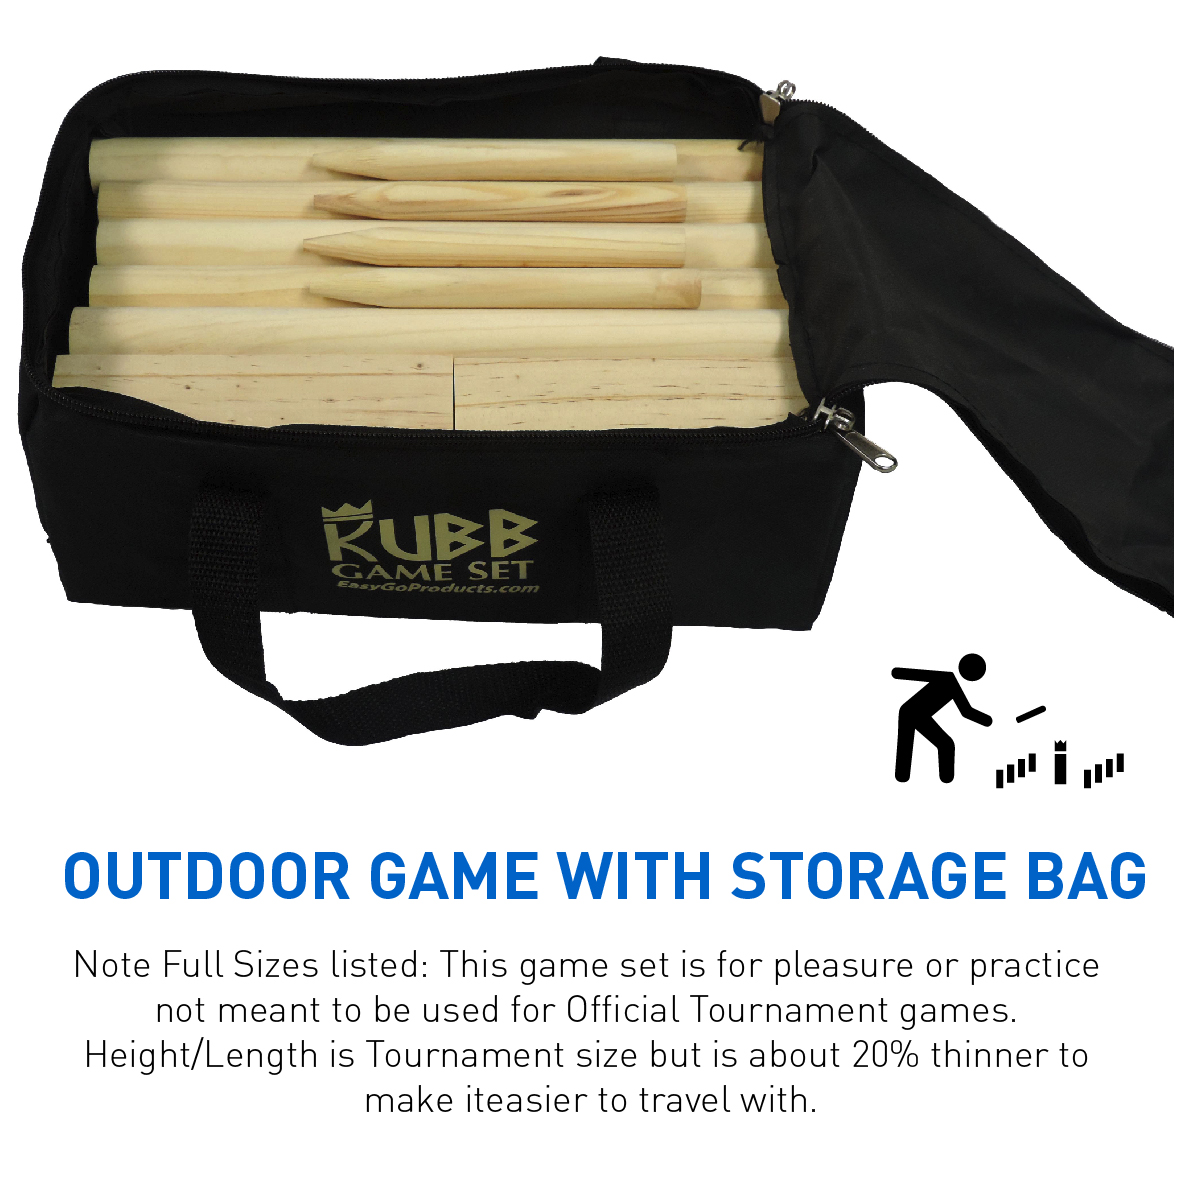 Kubb The Viking Wooden Outdoor Lawn Game  1 King, 10 Kubb Blocks, 6 Long Batons, 4 Corner Markers & Carrying Bag - image 2 of 4